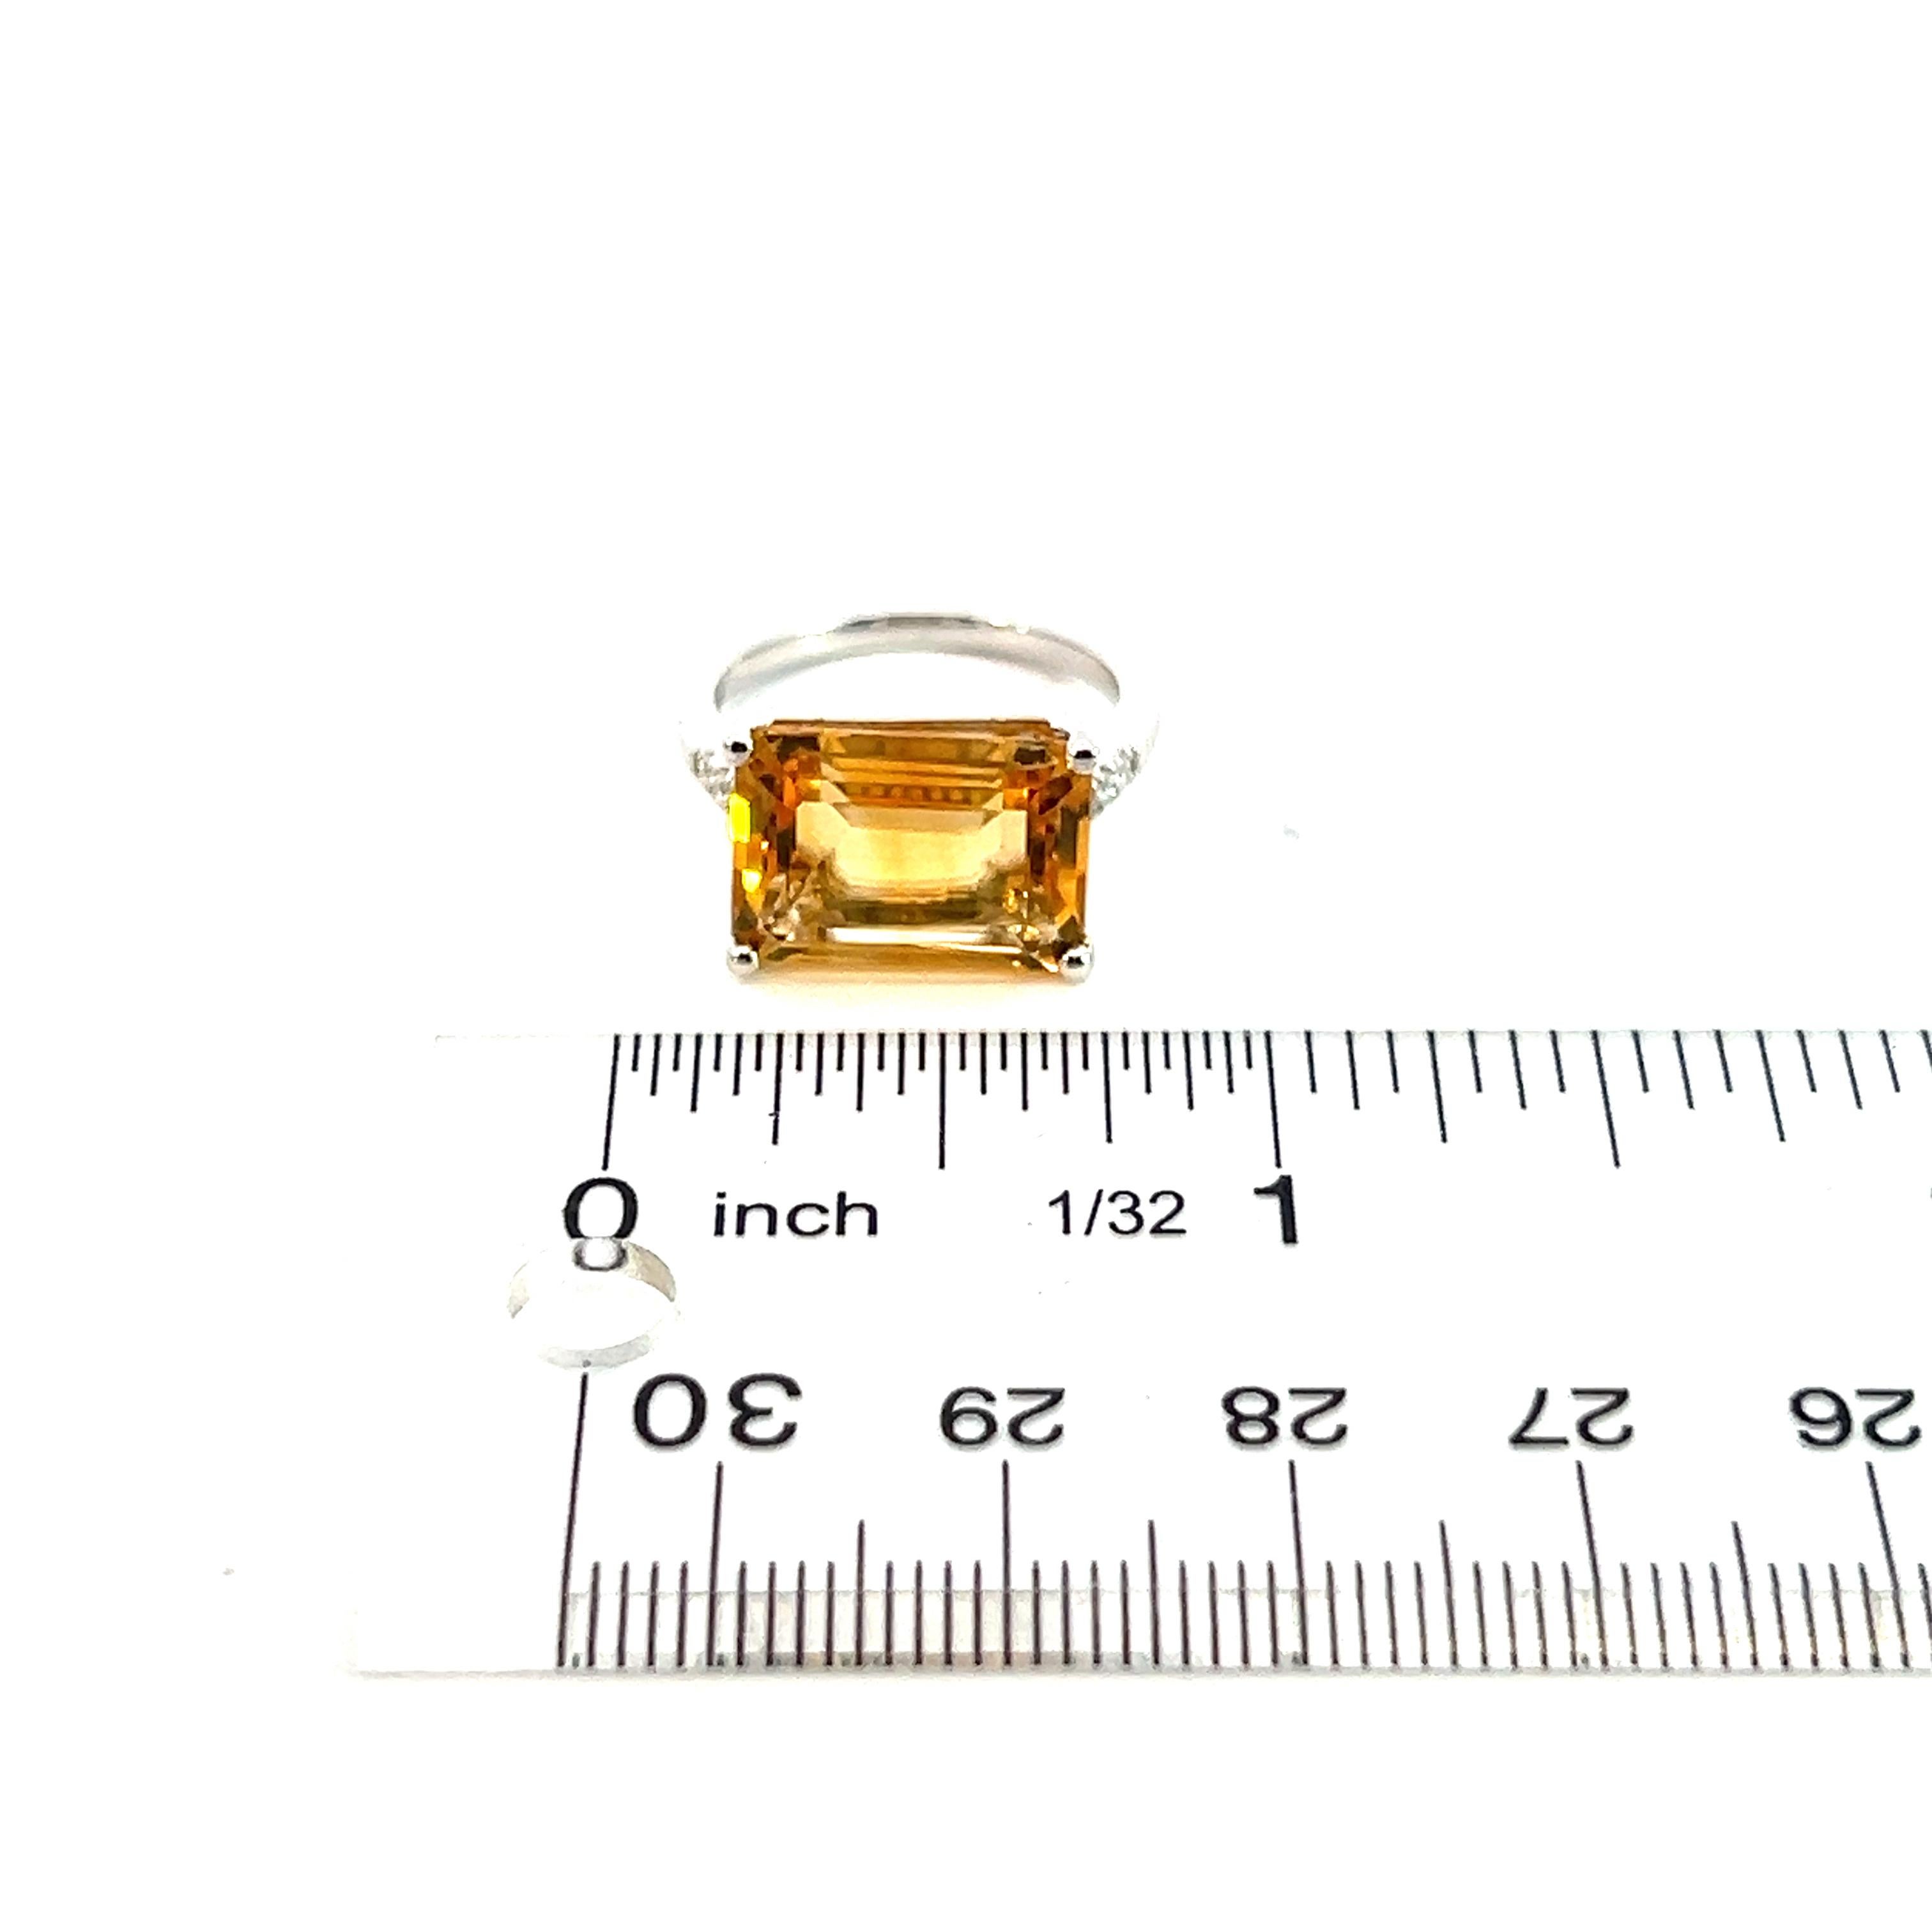 Natural Citrine Diamond Ring 6.5 14k W Gold 7.01 TCW Certified For Sale 10